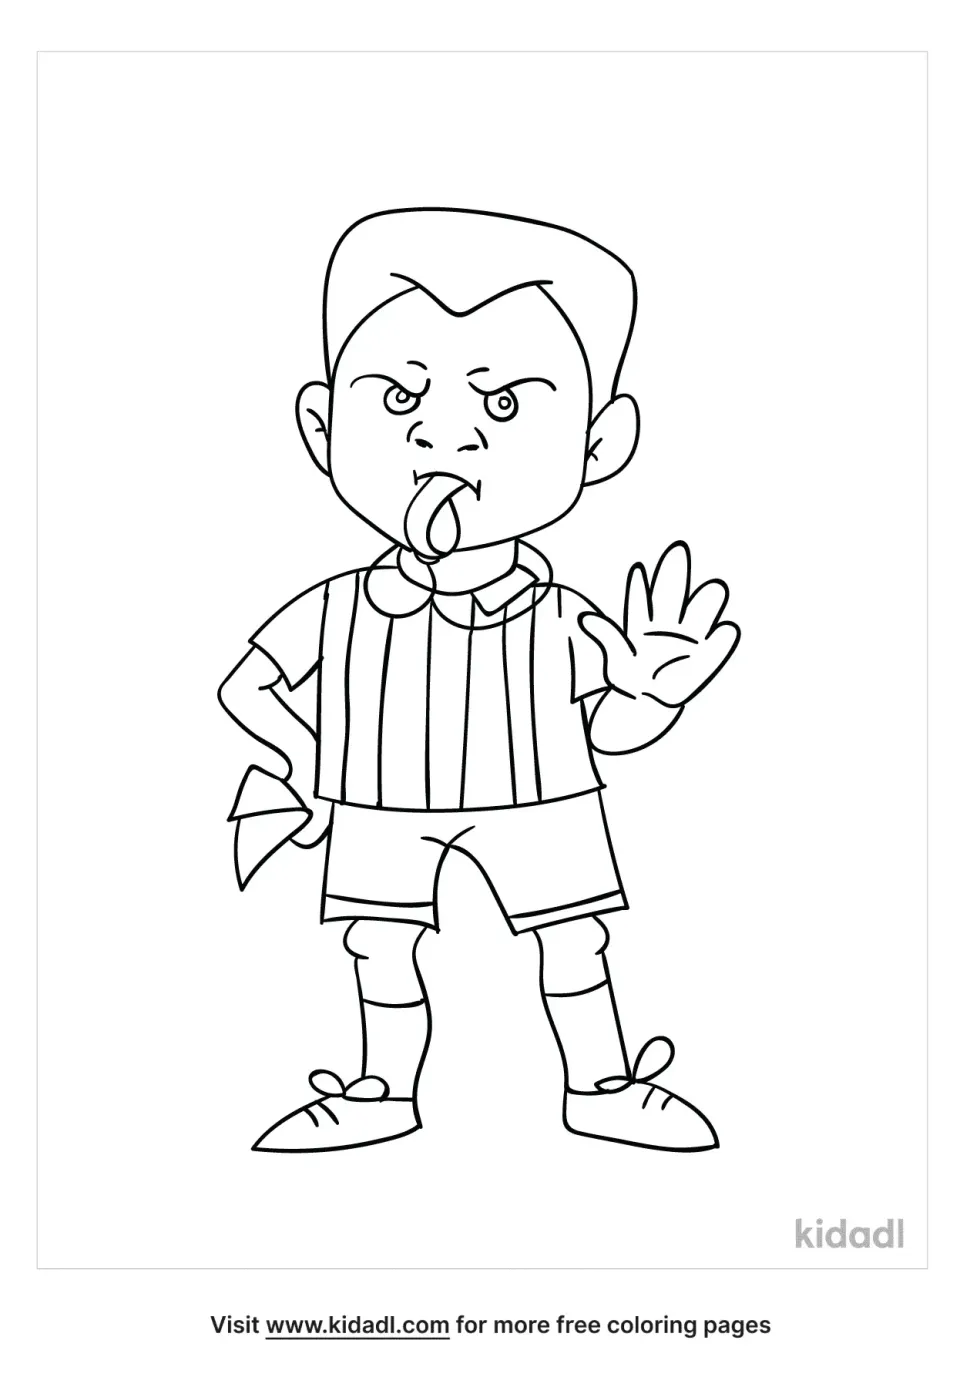 Referee Blowing Whistle Coloring Page